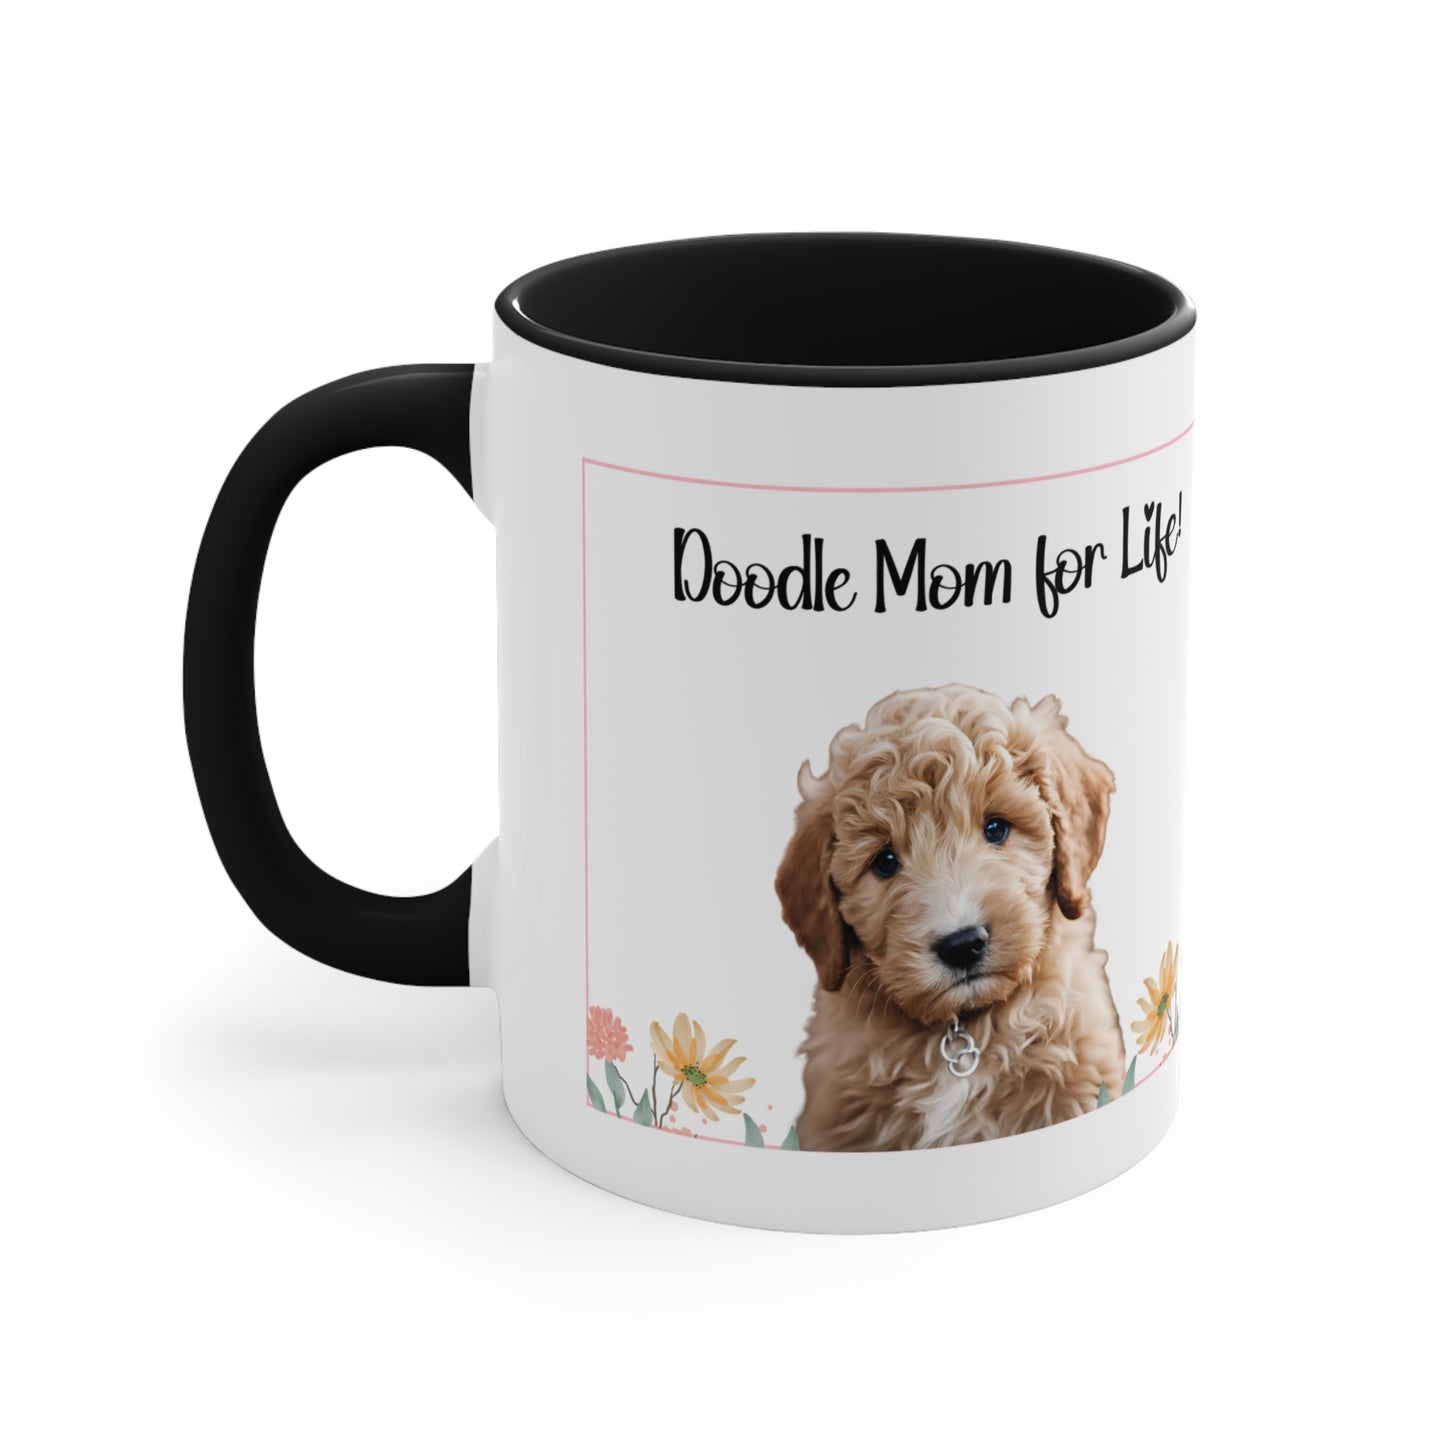 Golden doodle coffee mug, 11 oz hor gift or self, front view in black.